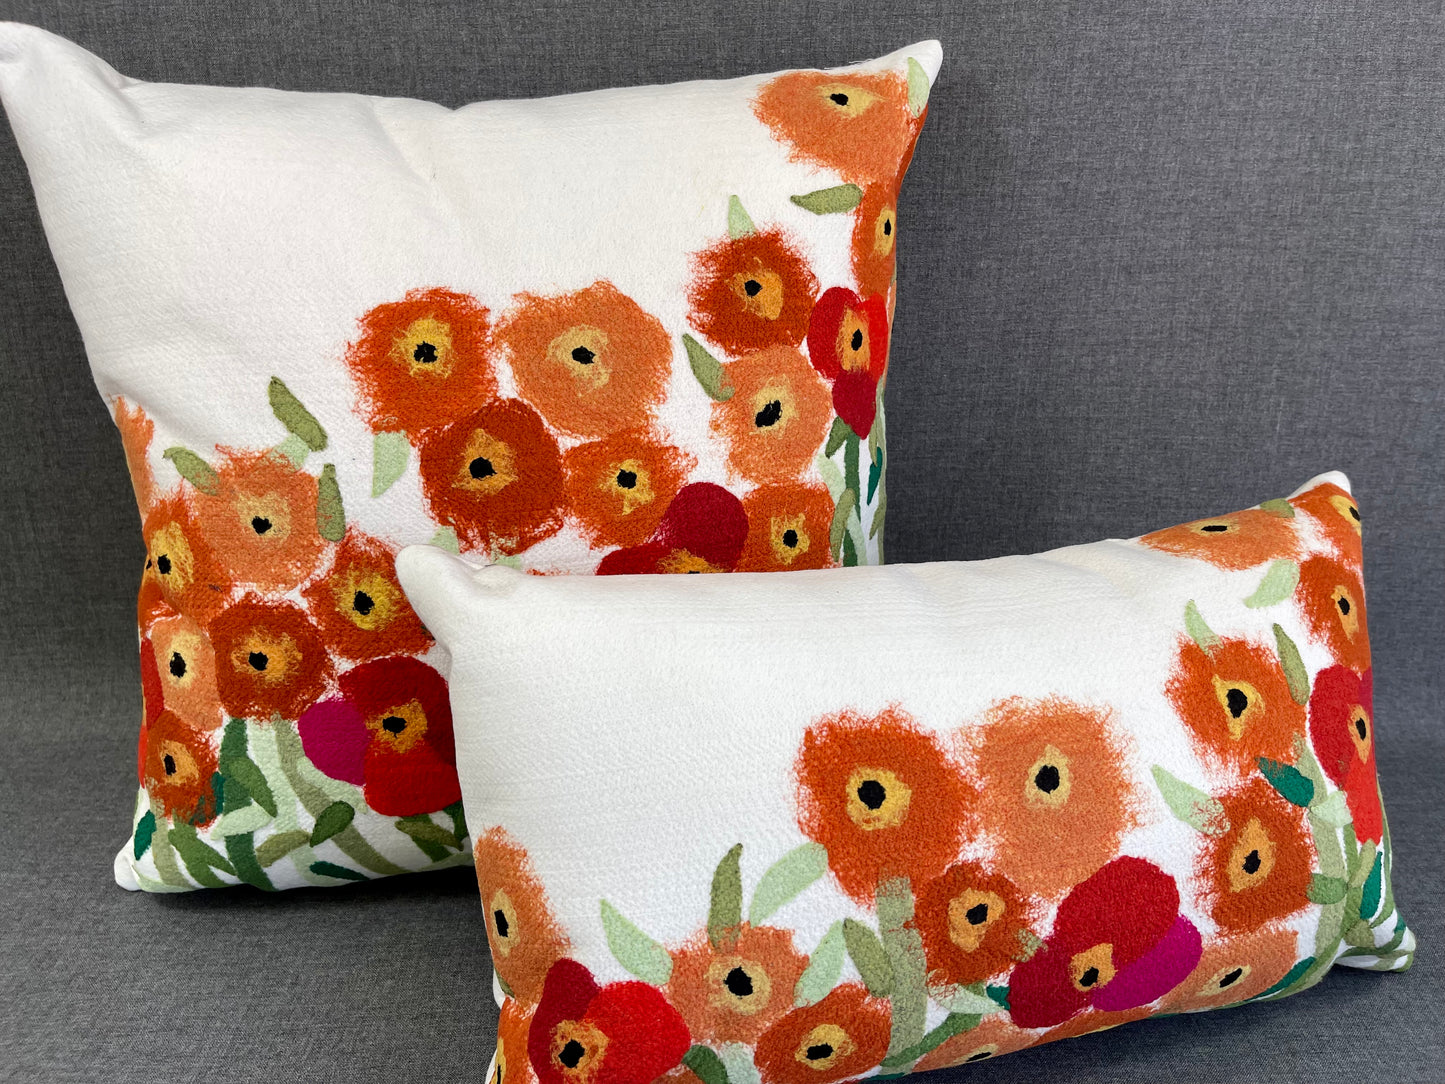 Luxury Outdoor Pillow - 18" x 18" - California Poppy; Cute flowers of red and orange on a white background, surrounded by green leaves